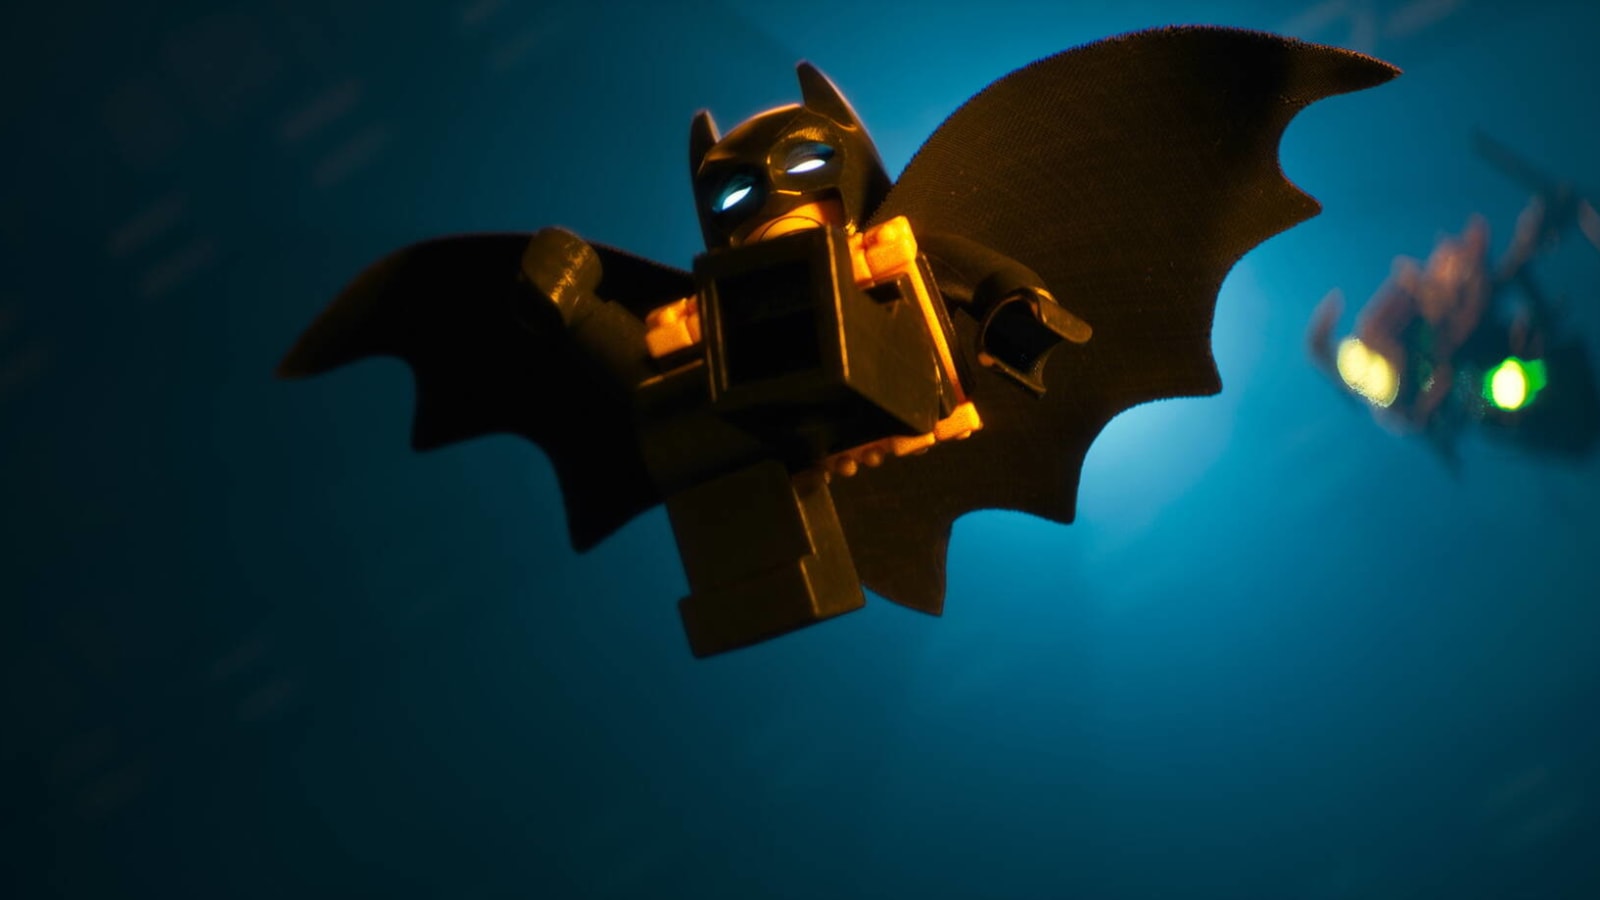 20 facts you might not know about 'The Lego Batman Movie'